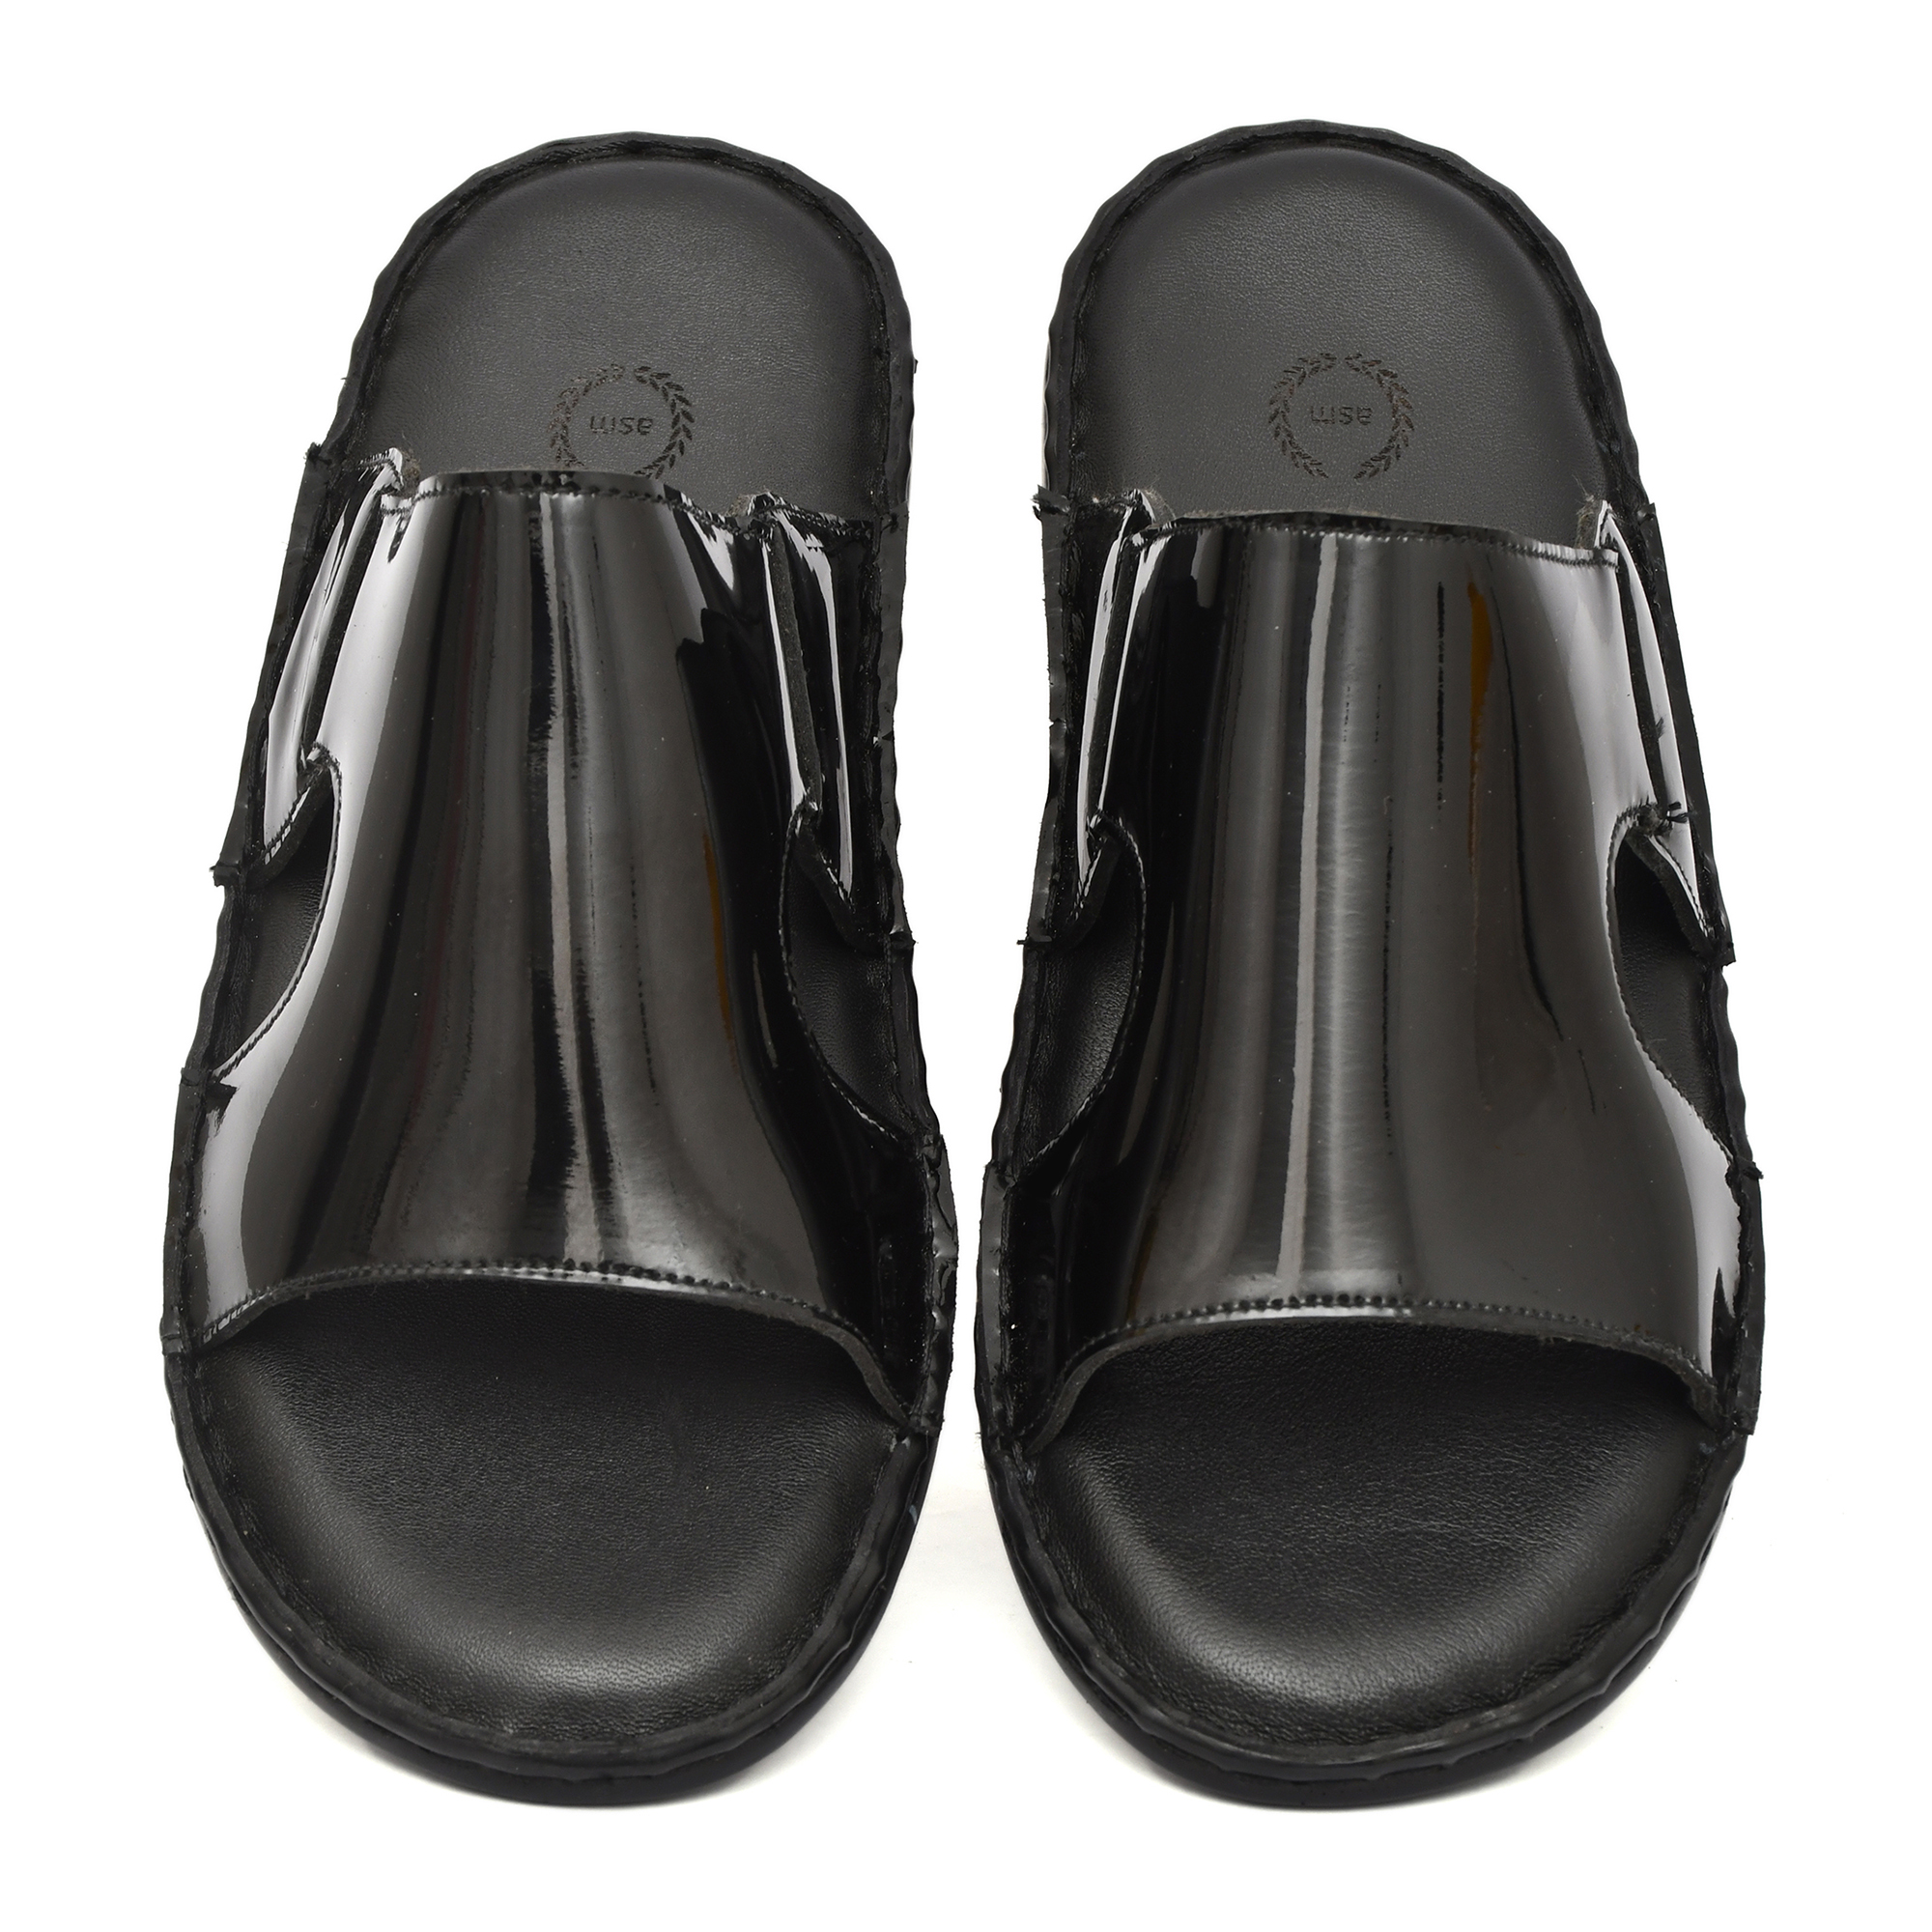 Black Patent Leather Slippers for Men with Memory foam footpad by asm.